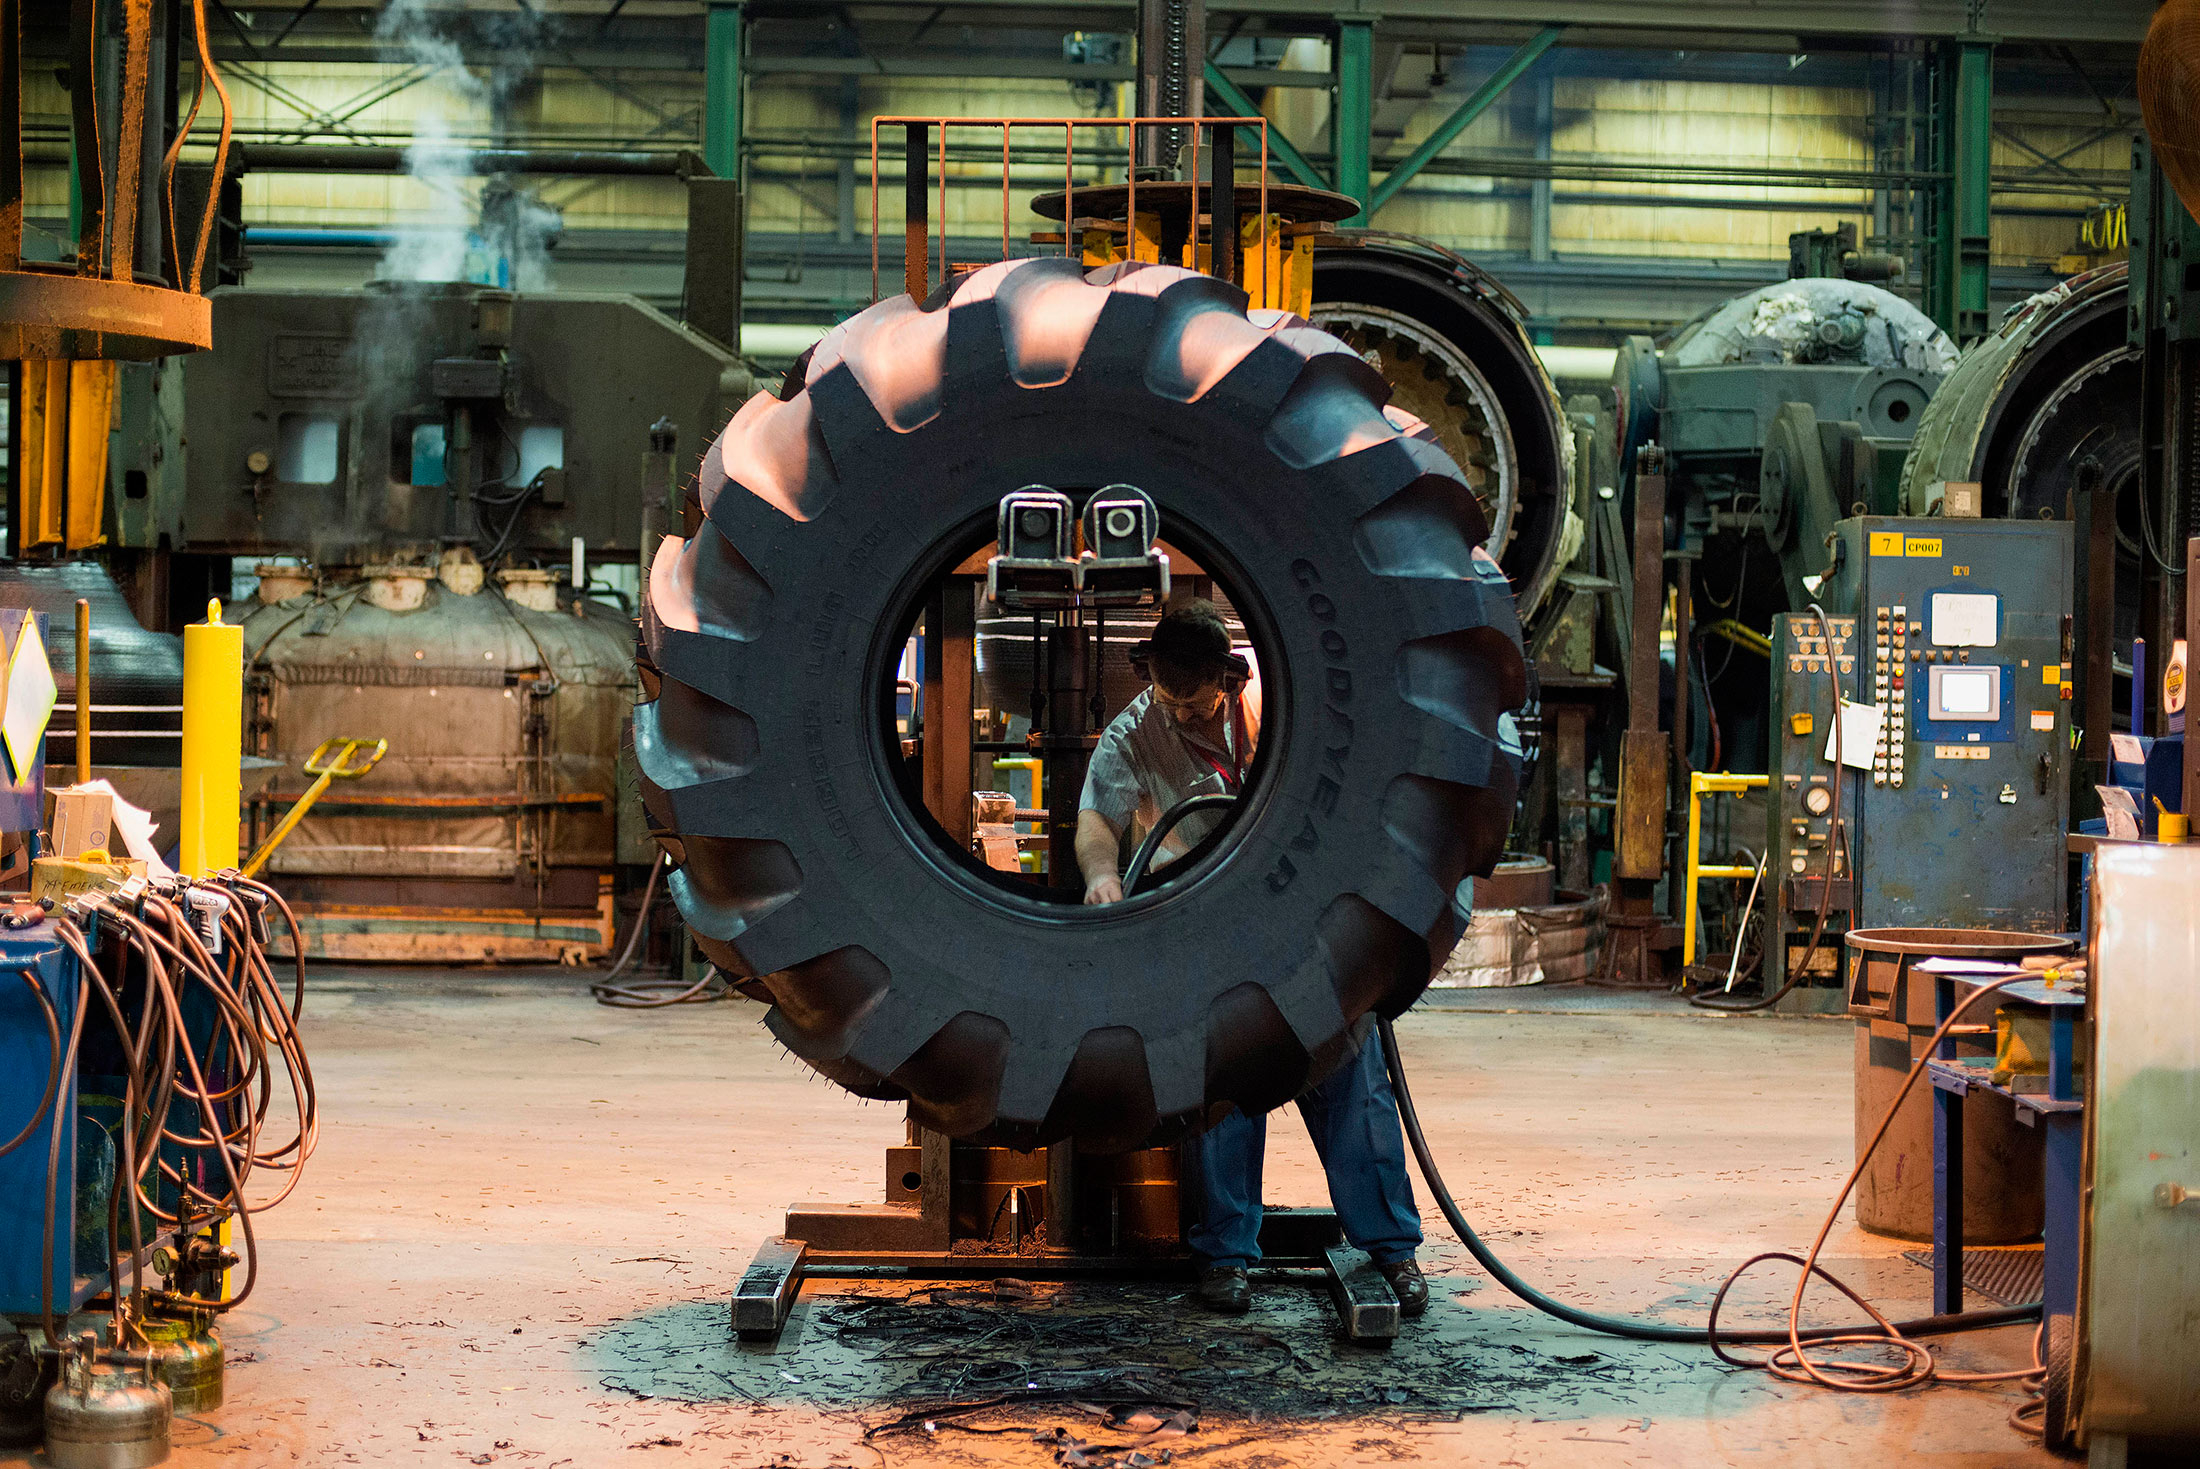 An employee works on the inside of a tire at a tire manufacturing facility in Bryan, Ohio, on March 13, 2015.
